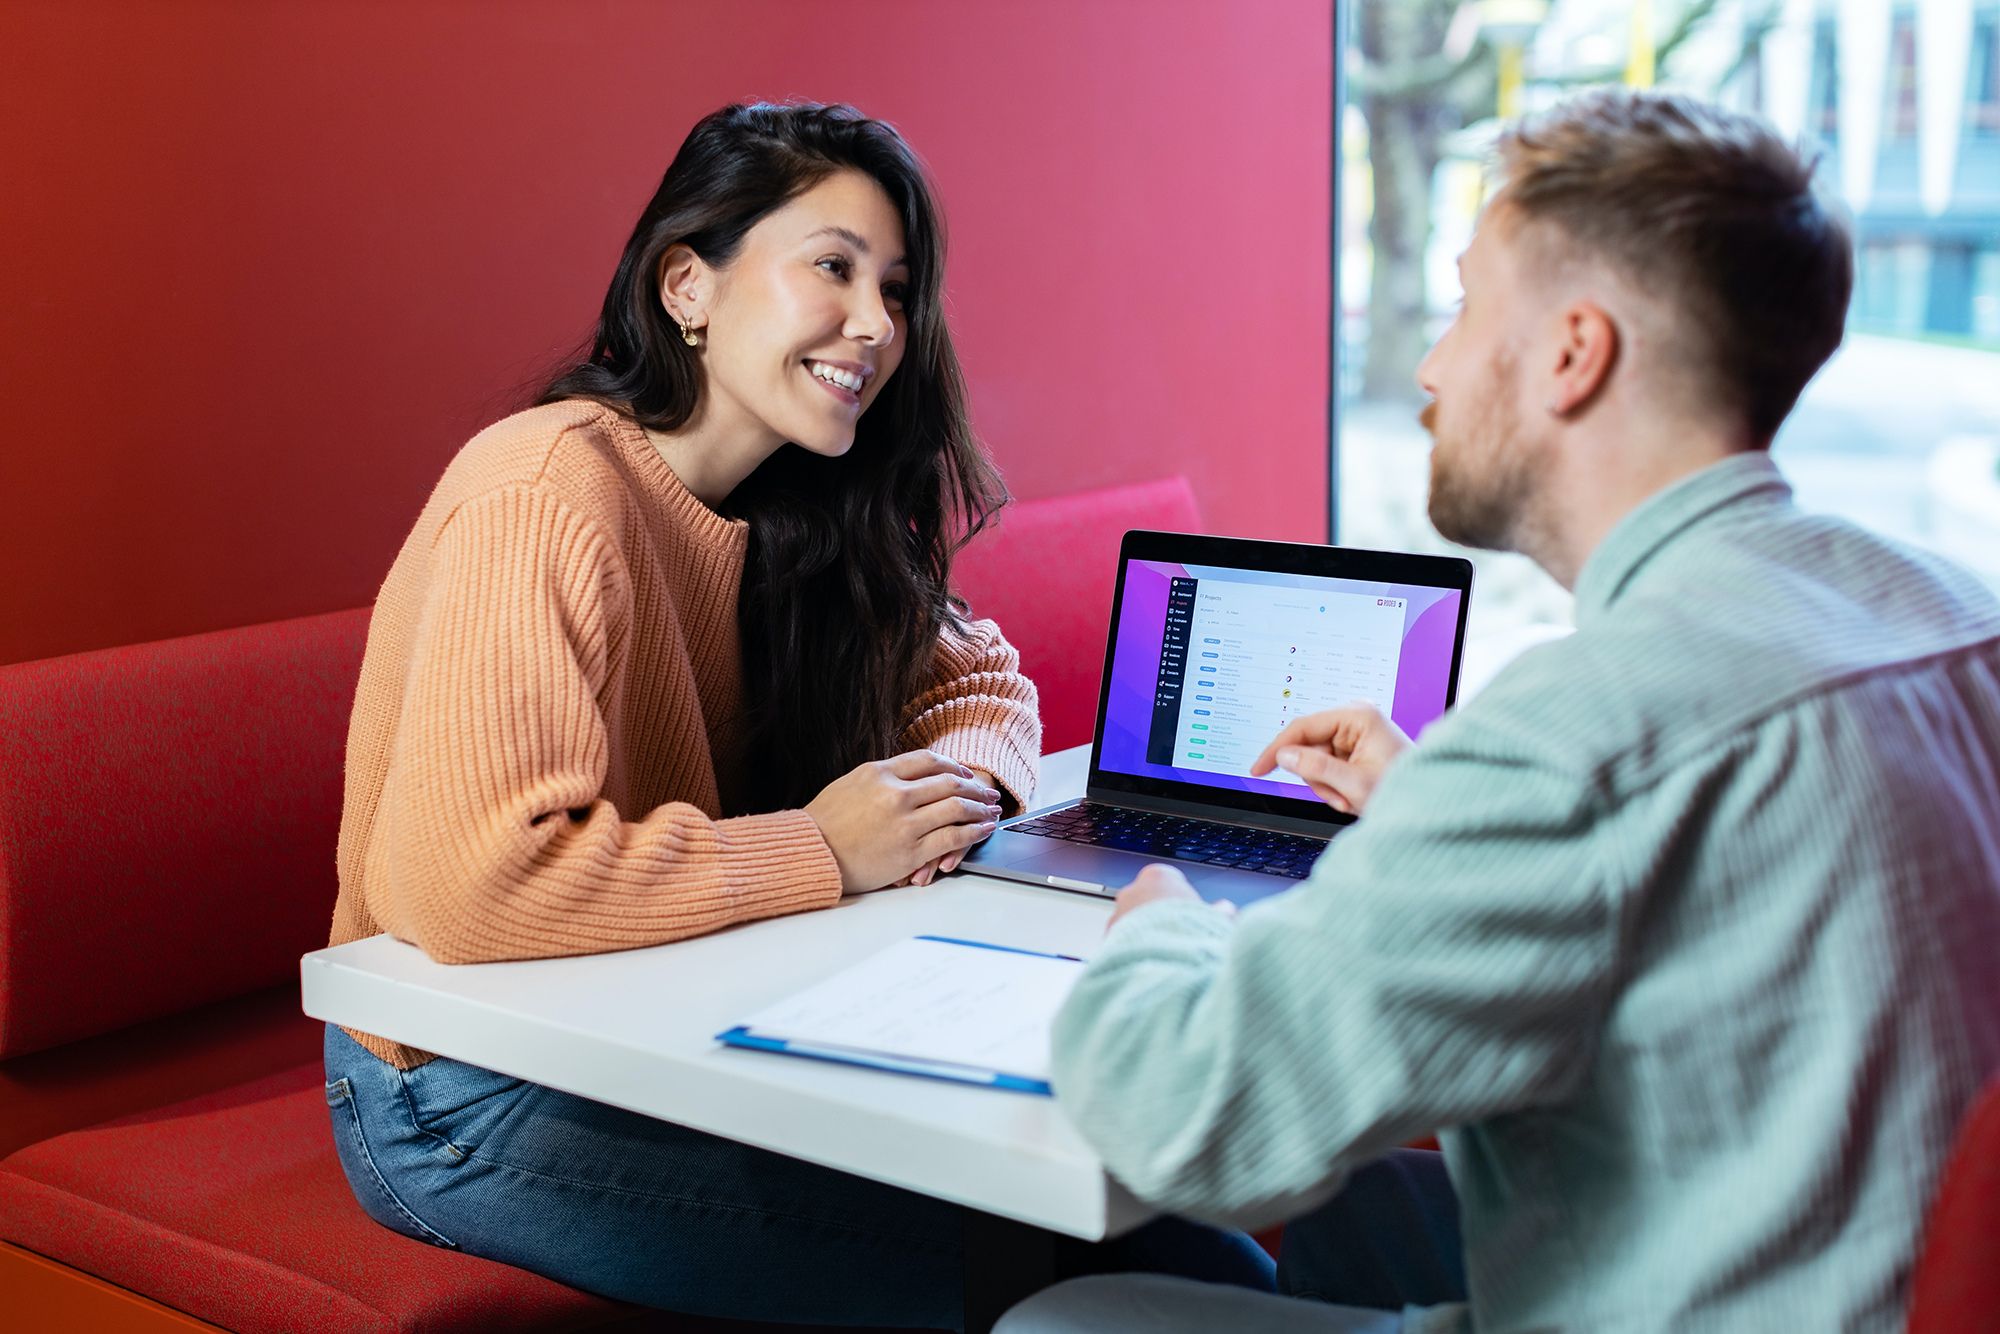 A smiling female staffing employee sitting across from a male recruiter discussing how to refer-a-friend and referral program for Onward Search